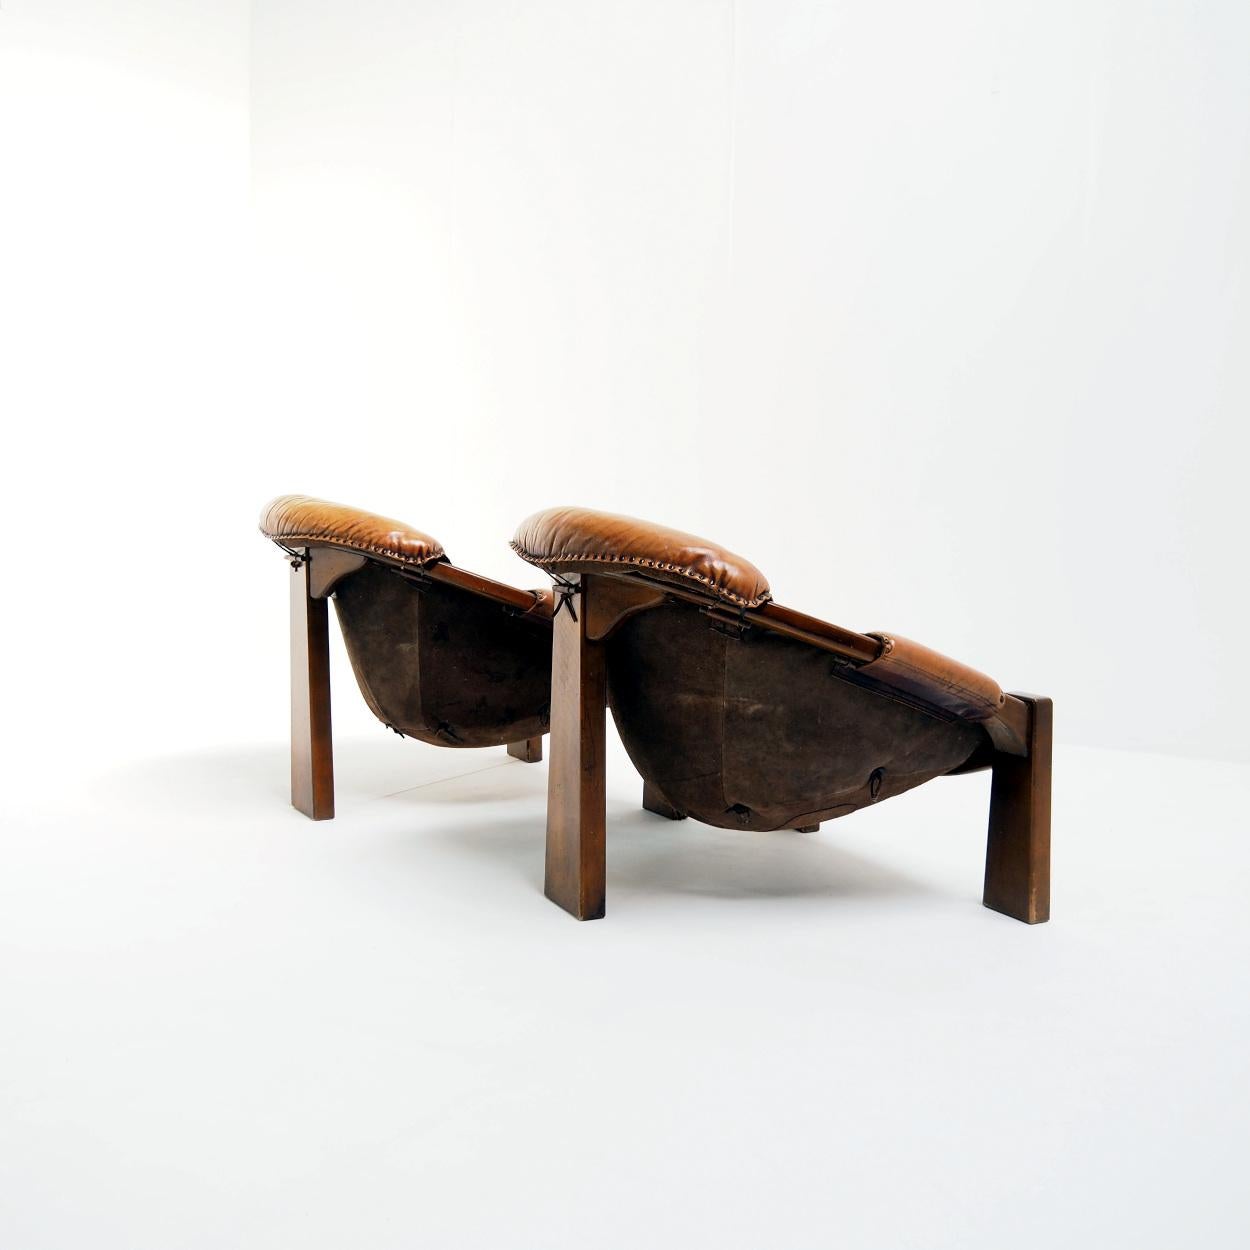 Beautiful set of chairs in the Brazilian brutalist style from the 1970s.

The chairs have beautiful patinated leather with signs of wear corresponding with age and use. They are made of thick goatskin leather, leather stitching and solid wood.

The